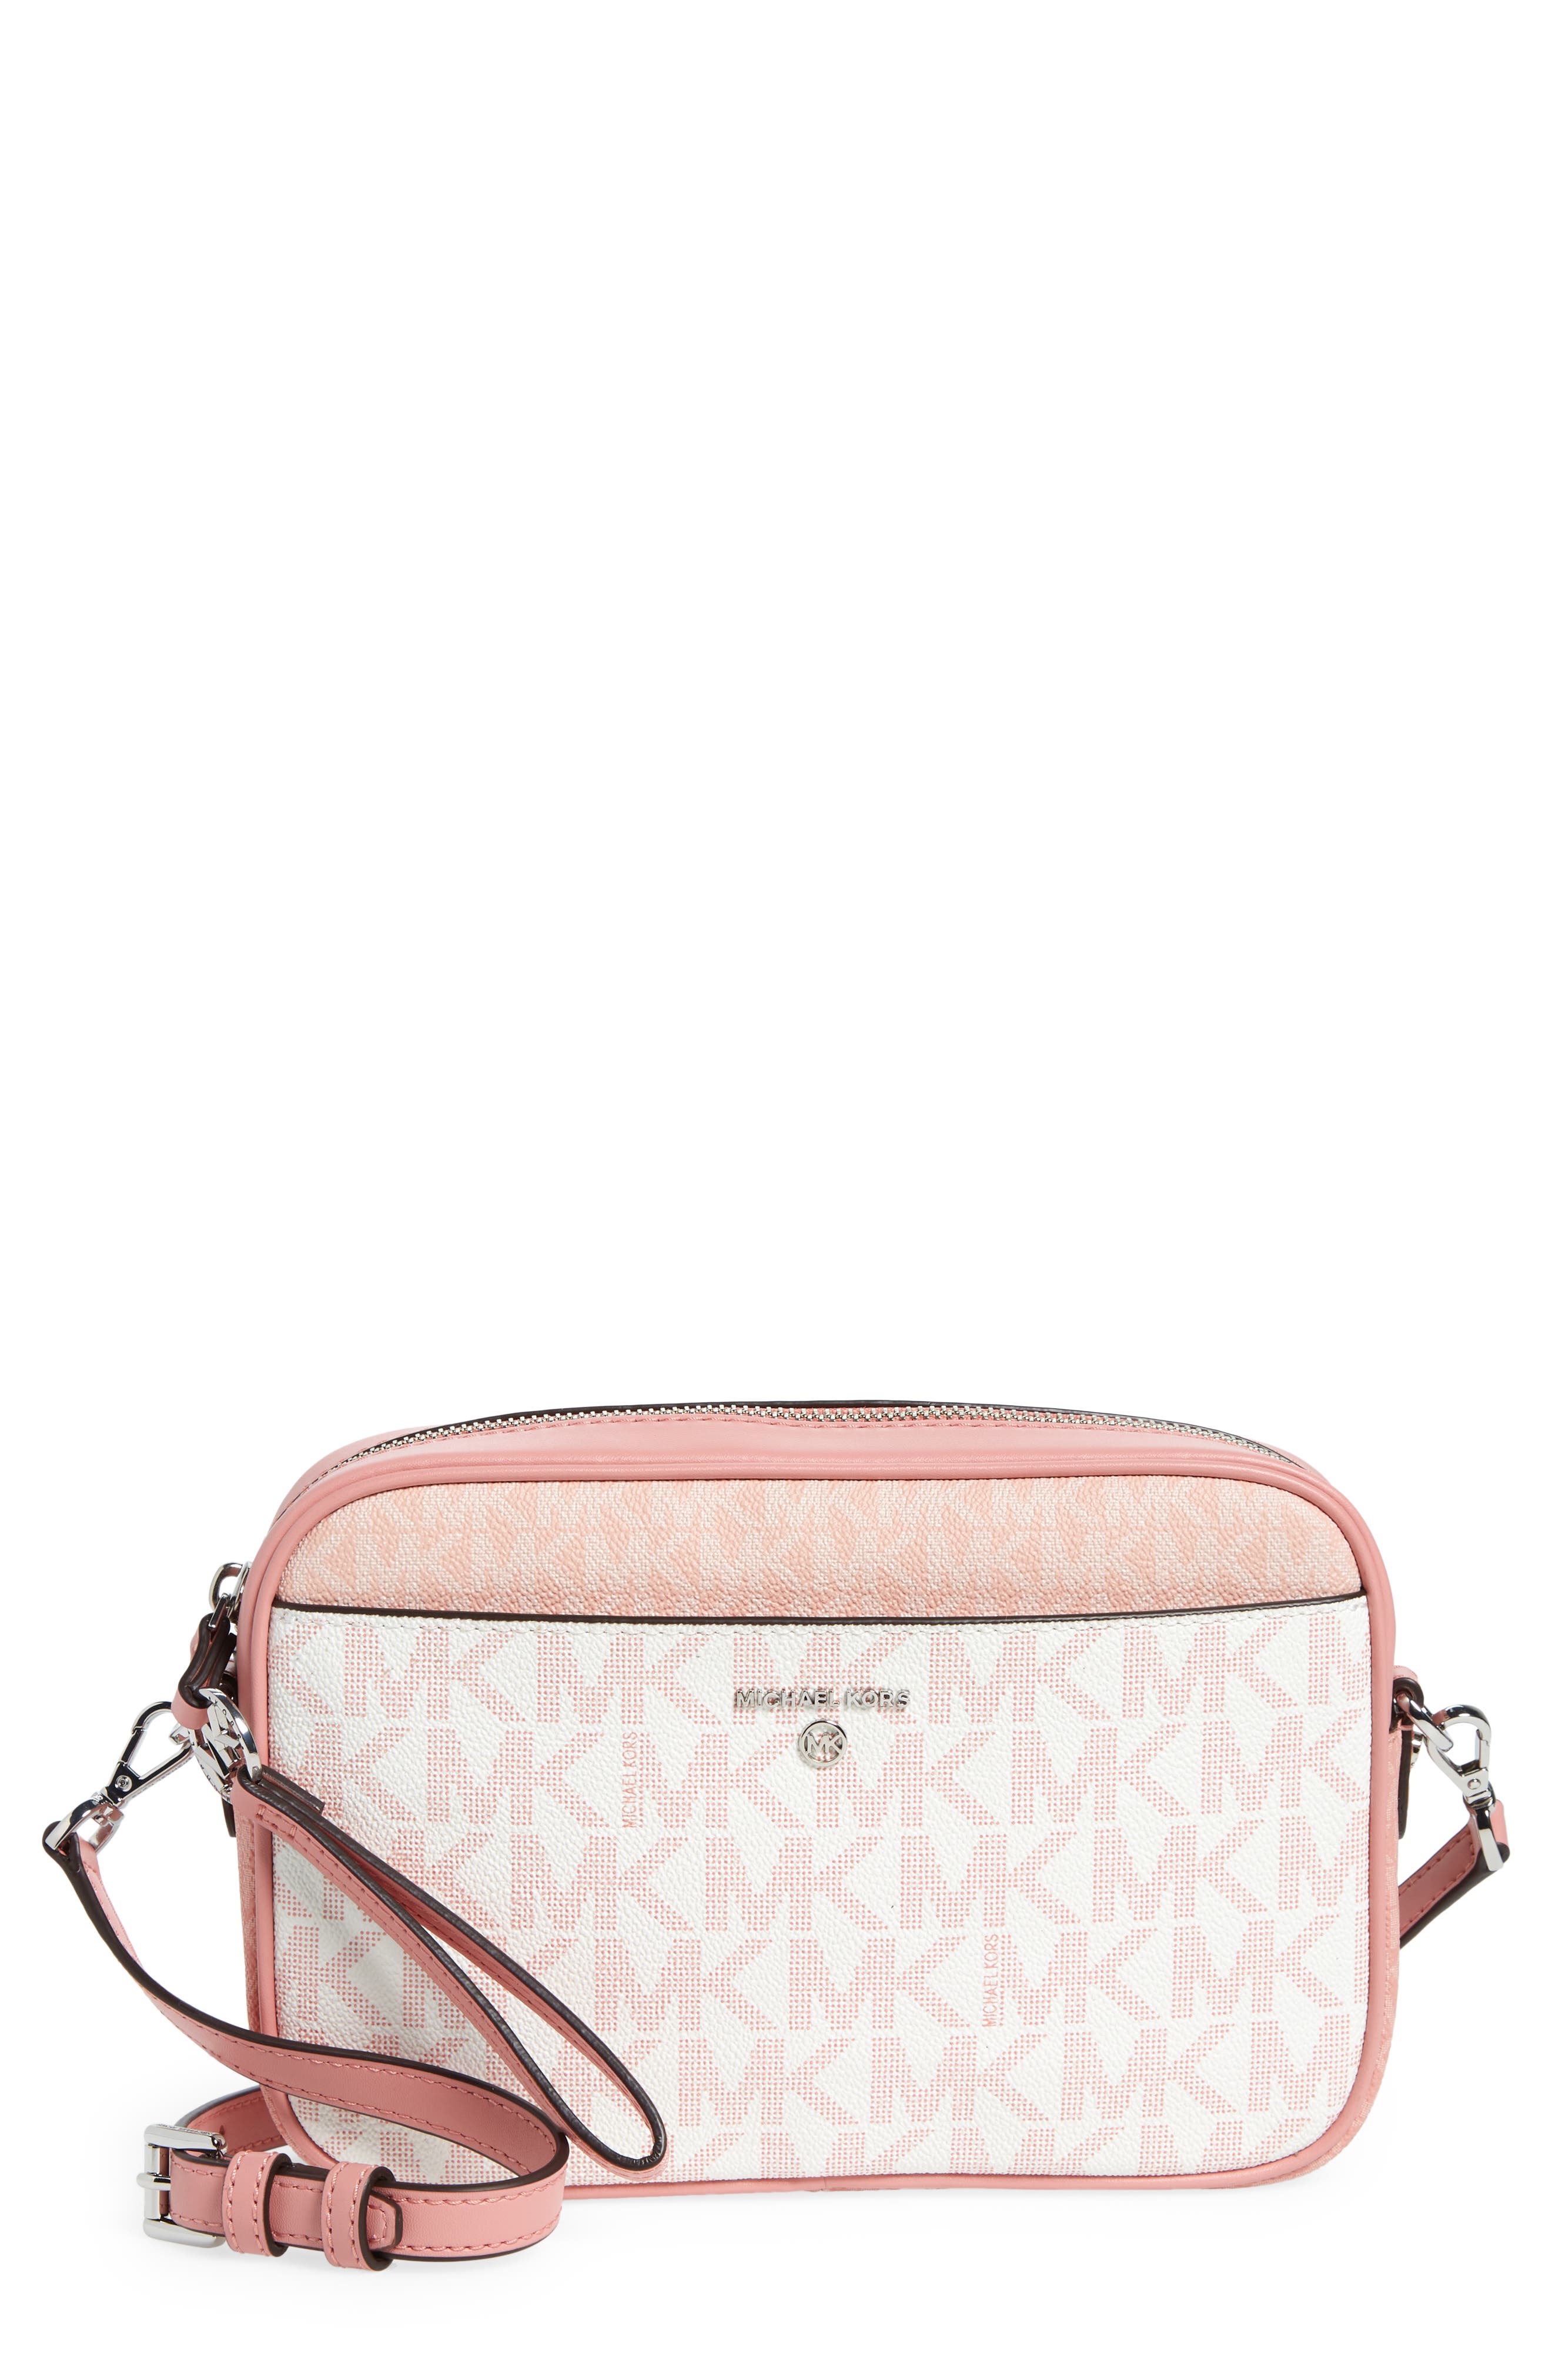 MICHAEL Michael Kors Jet Set Charm East West Trunk Xbody Bag in Pink